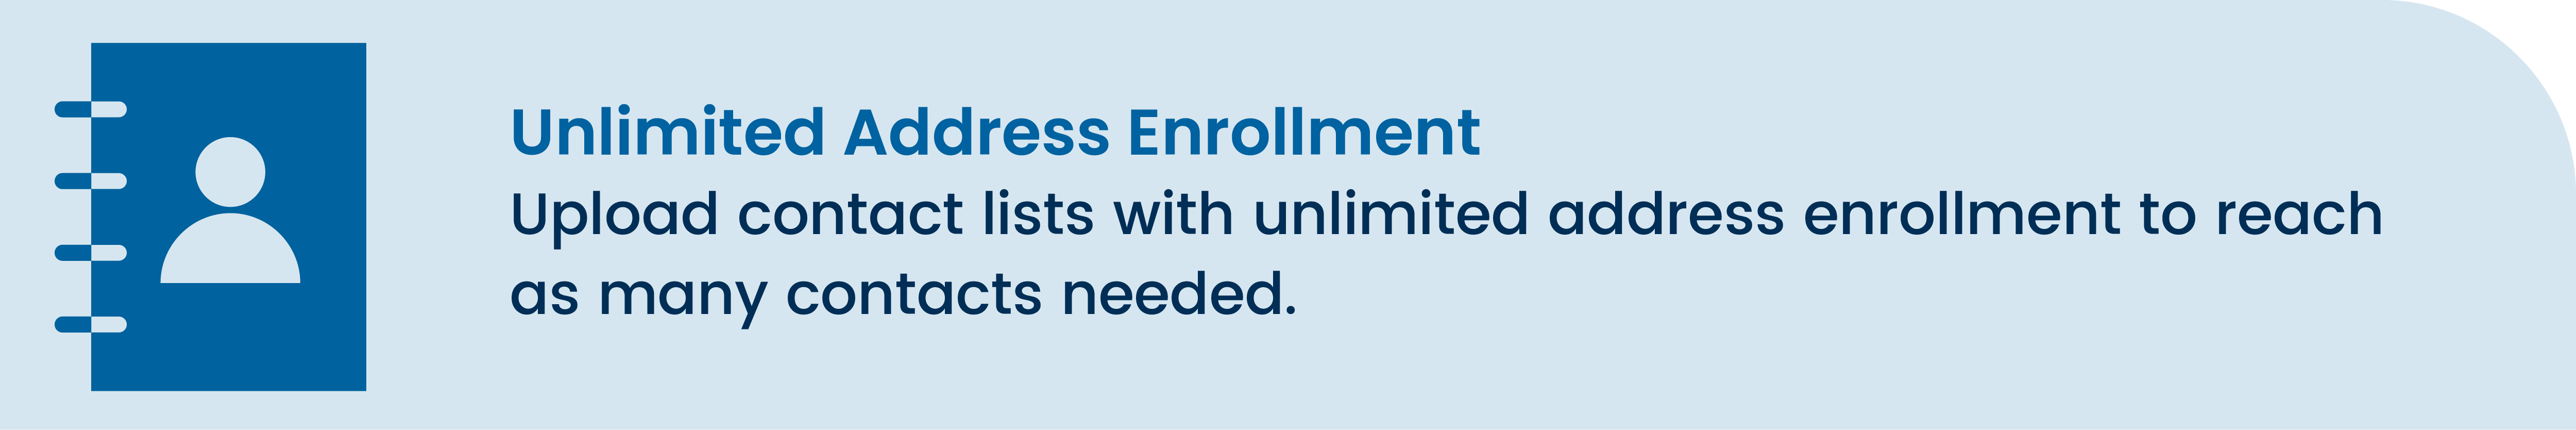 Scheduled Campaigns benefits Unlimited Address Enrollment 4